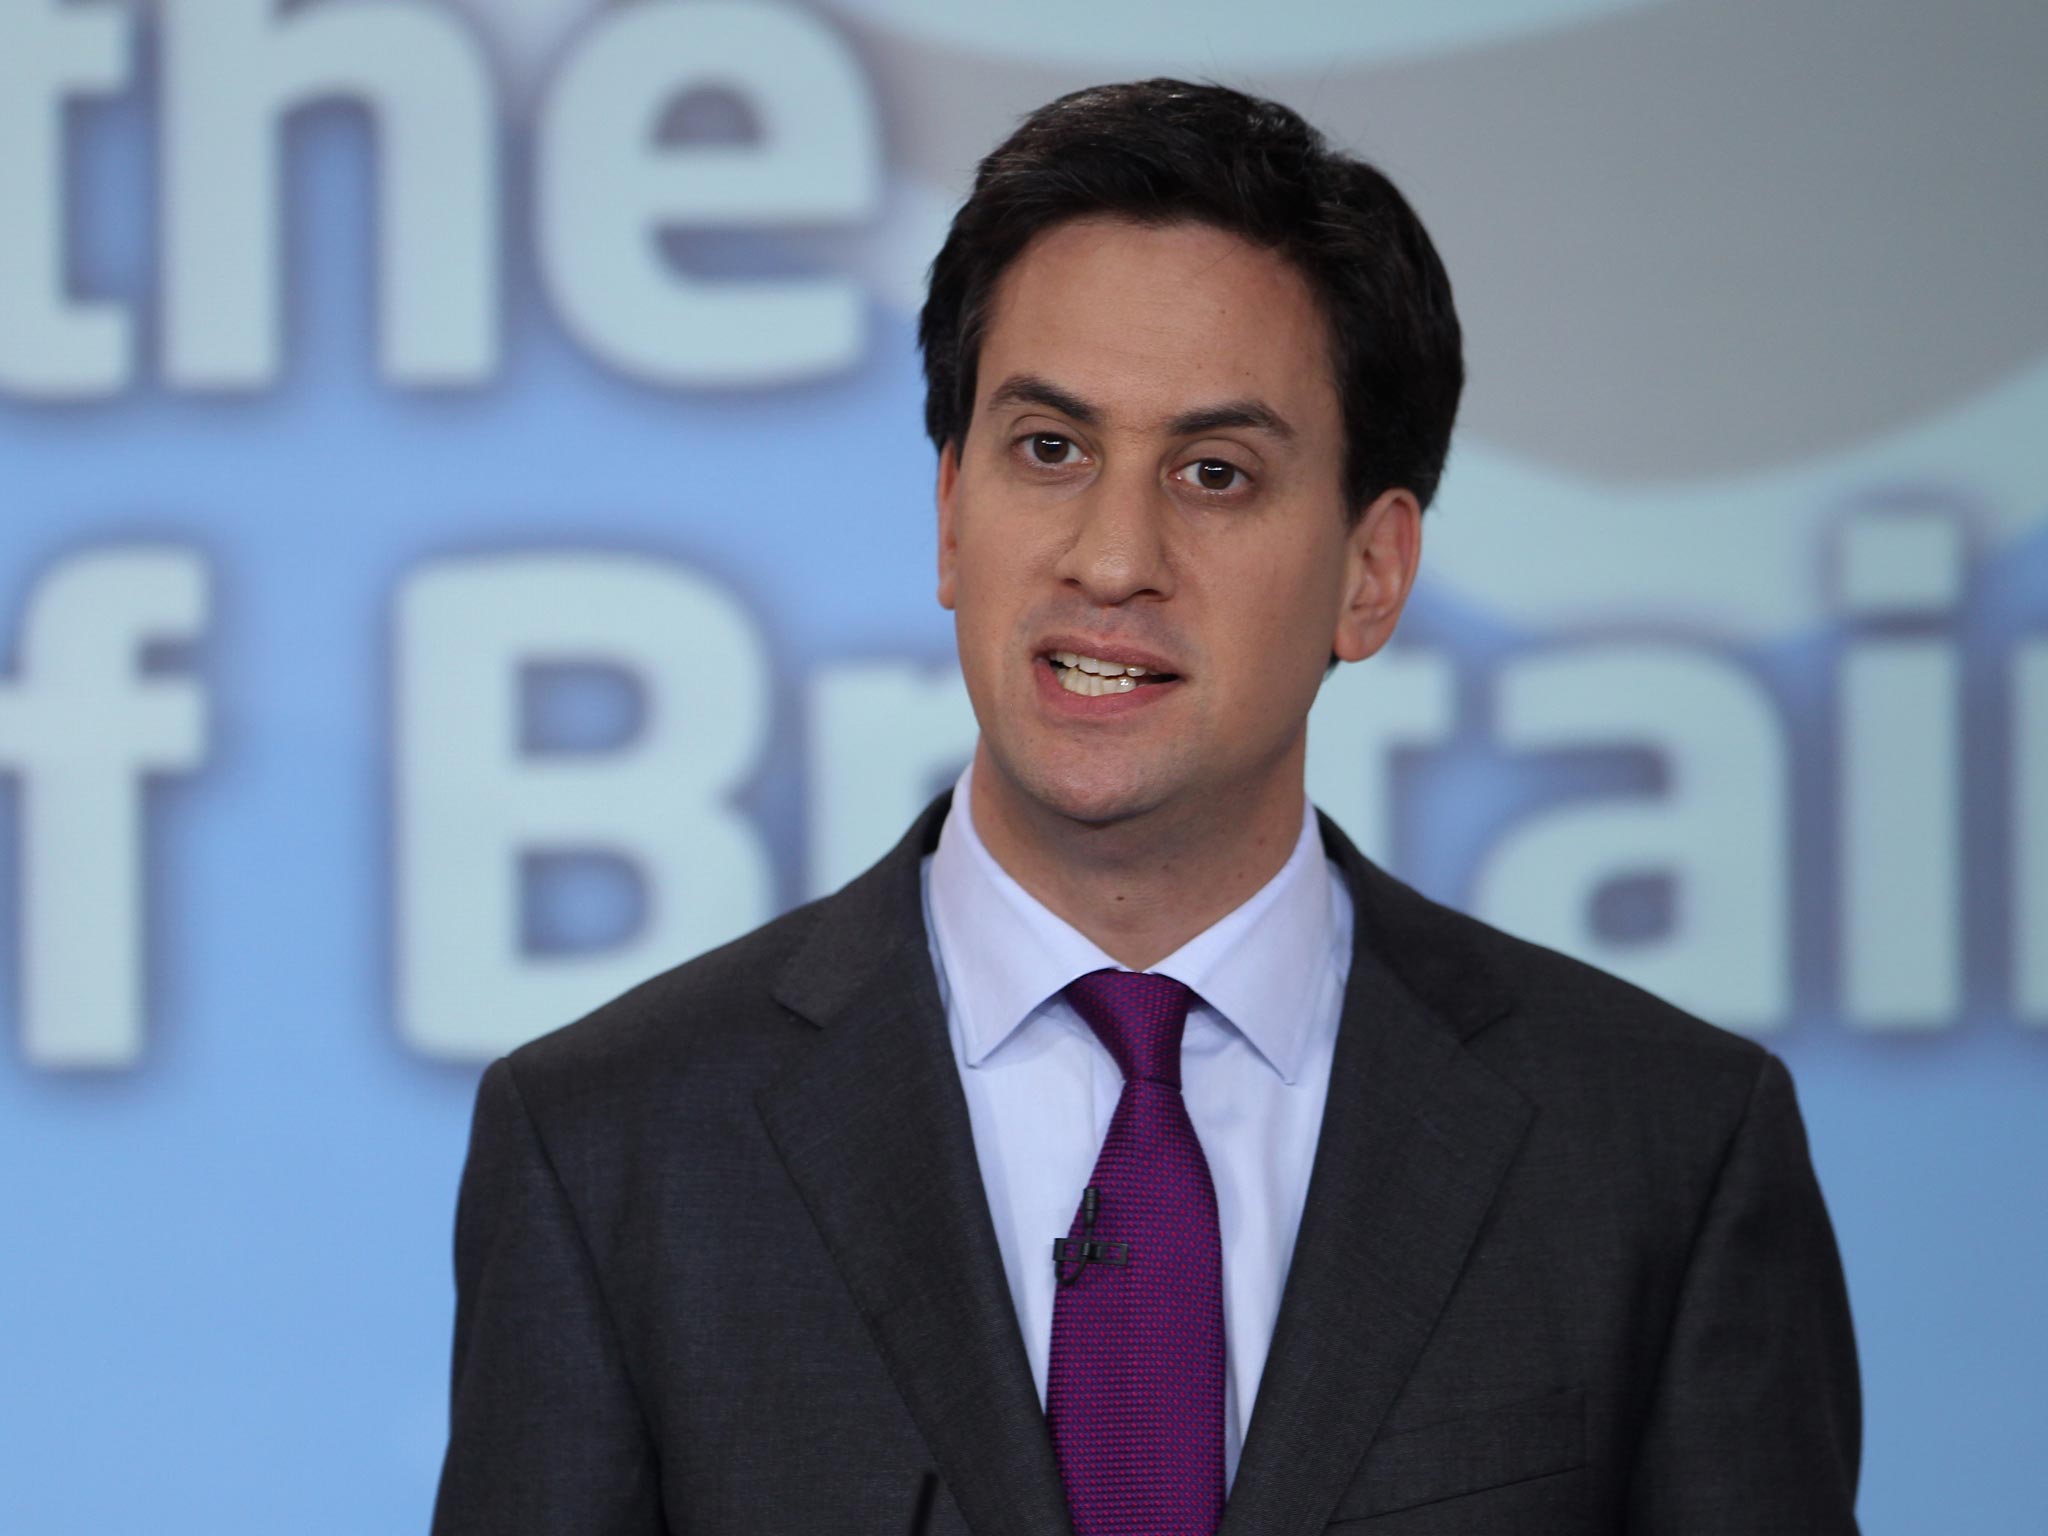 Ed Miliband says that Labour will replace the Lobbying Act with the regulation of lobbying if they win the next election